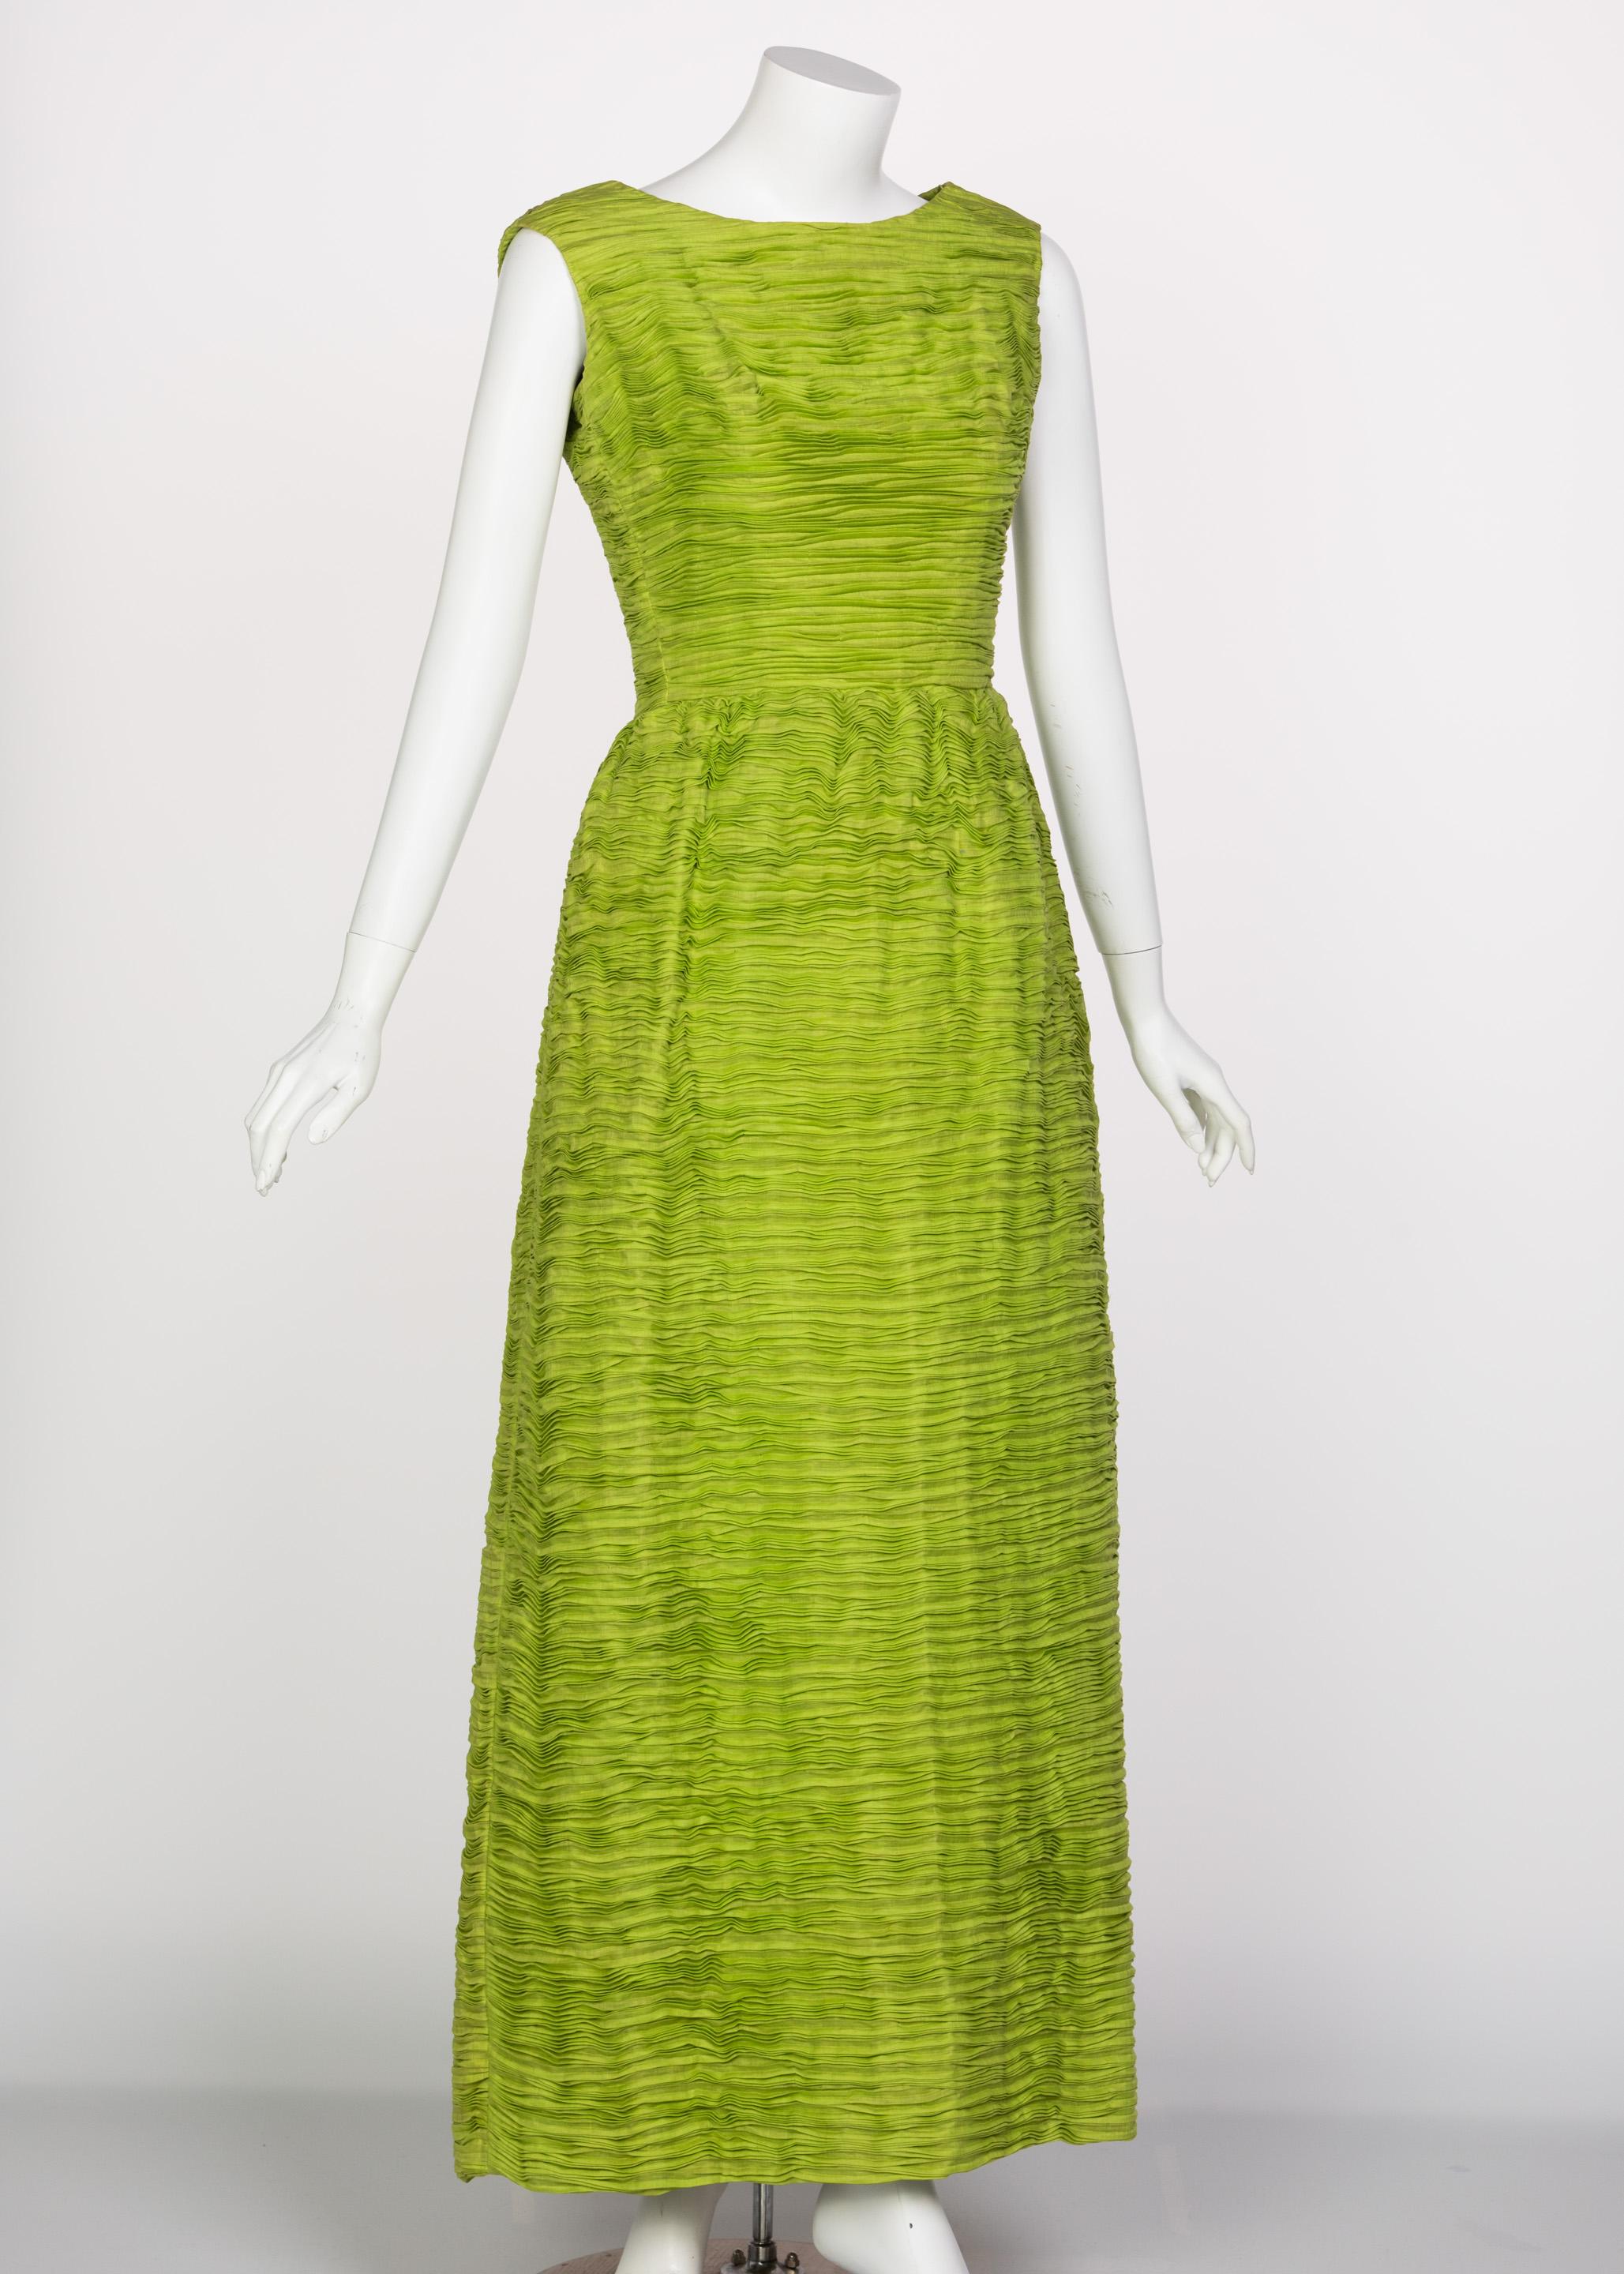 Known as the Dior of Dublin, couturier Sybil Connolly is revered for her high caliber designs and artisanal technique. A raving success since her first fashion show in 1953 which landed her the cover of Life magazine, Connolly can easily be said to